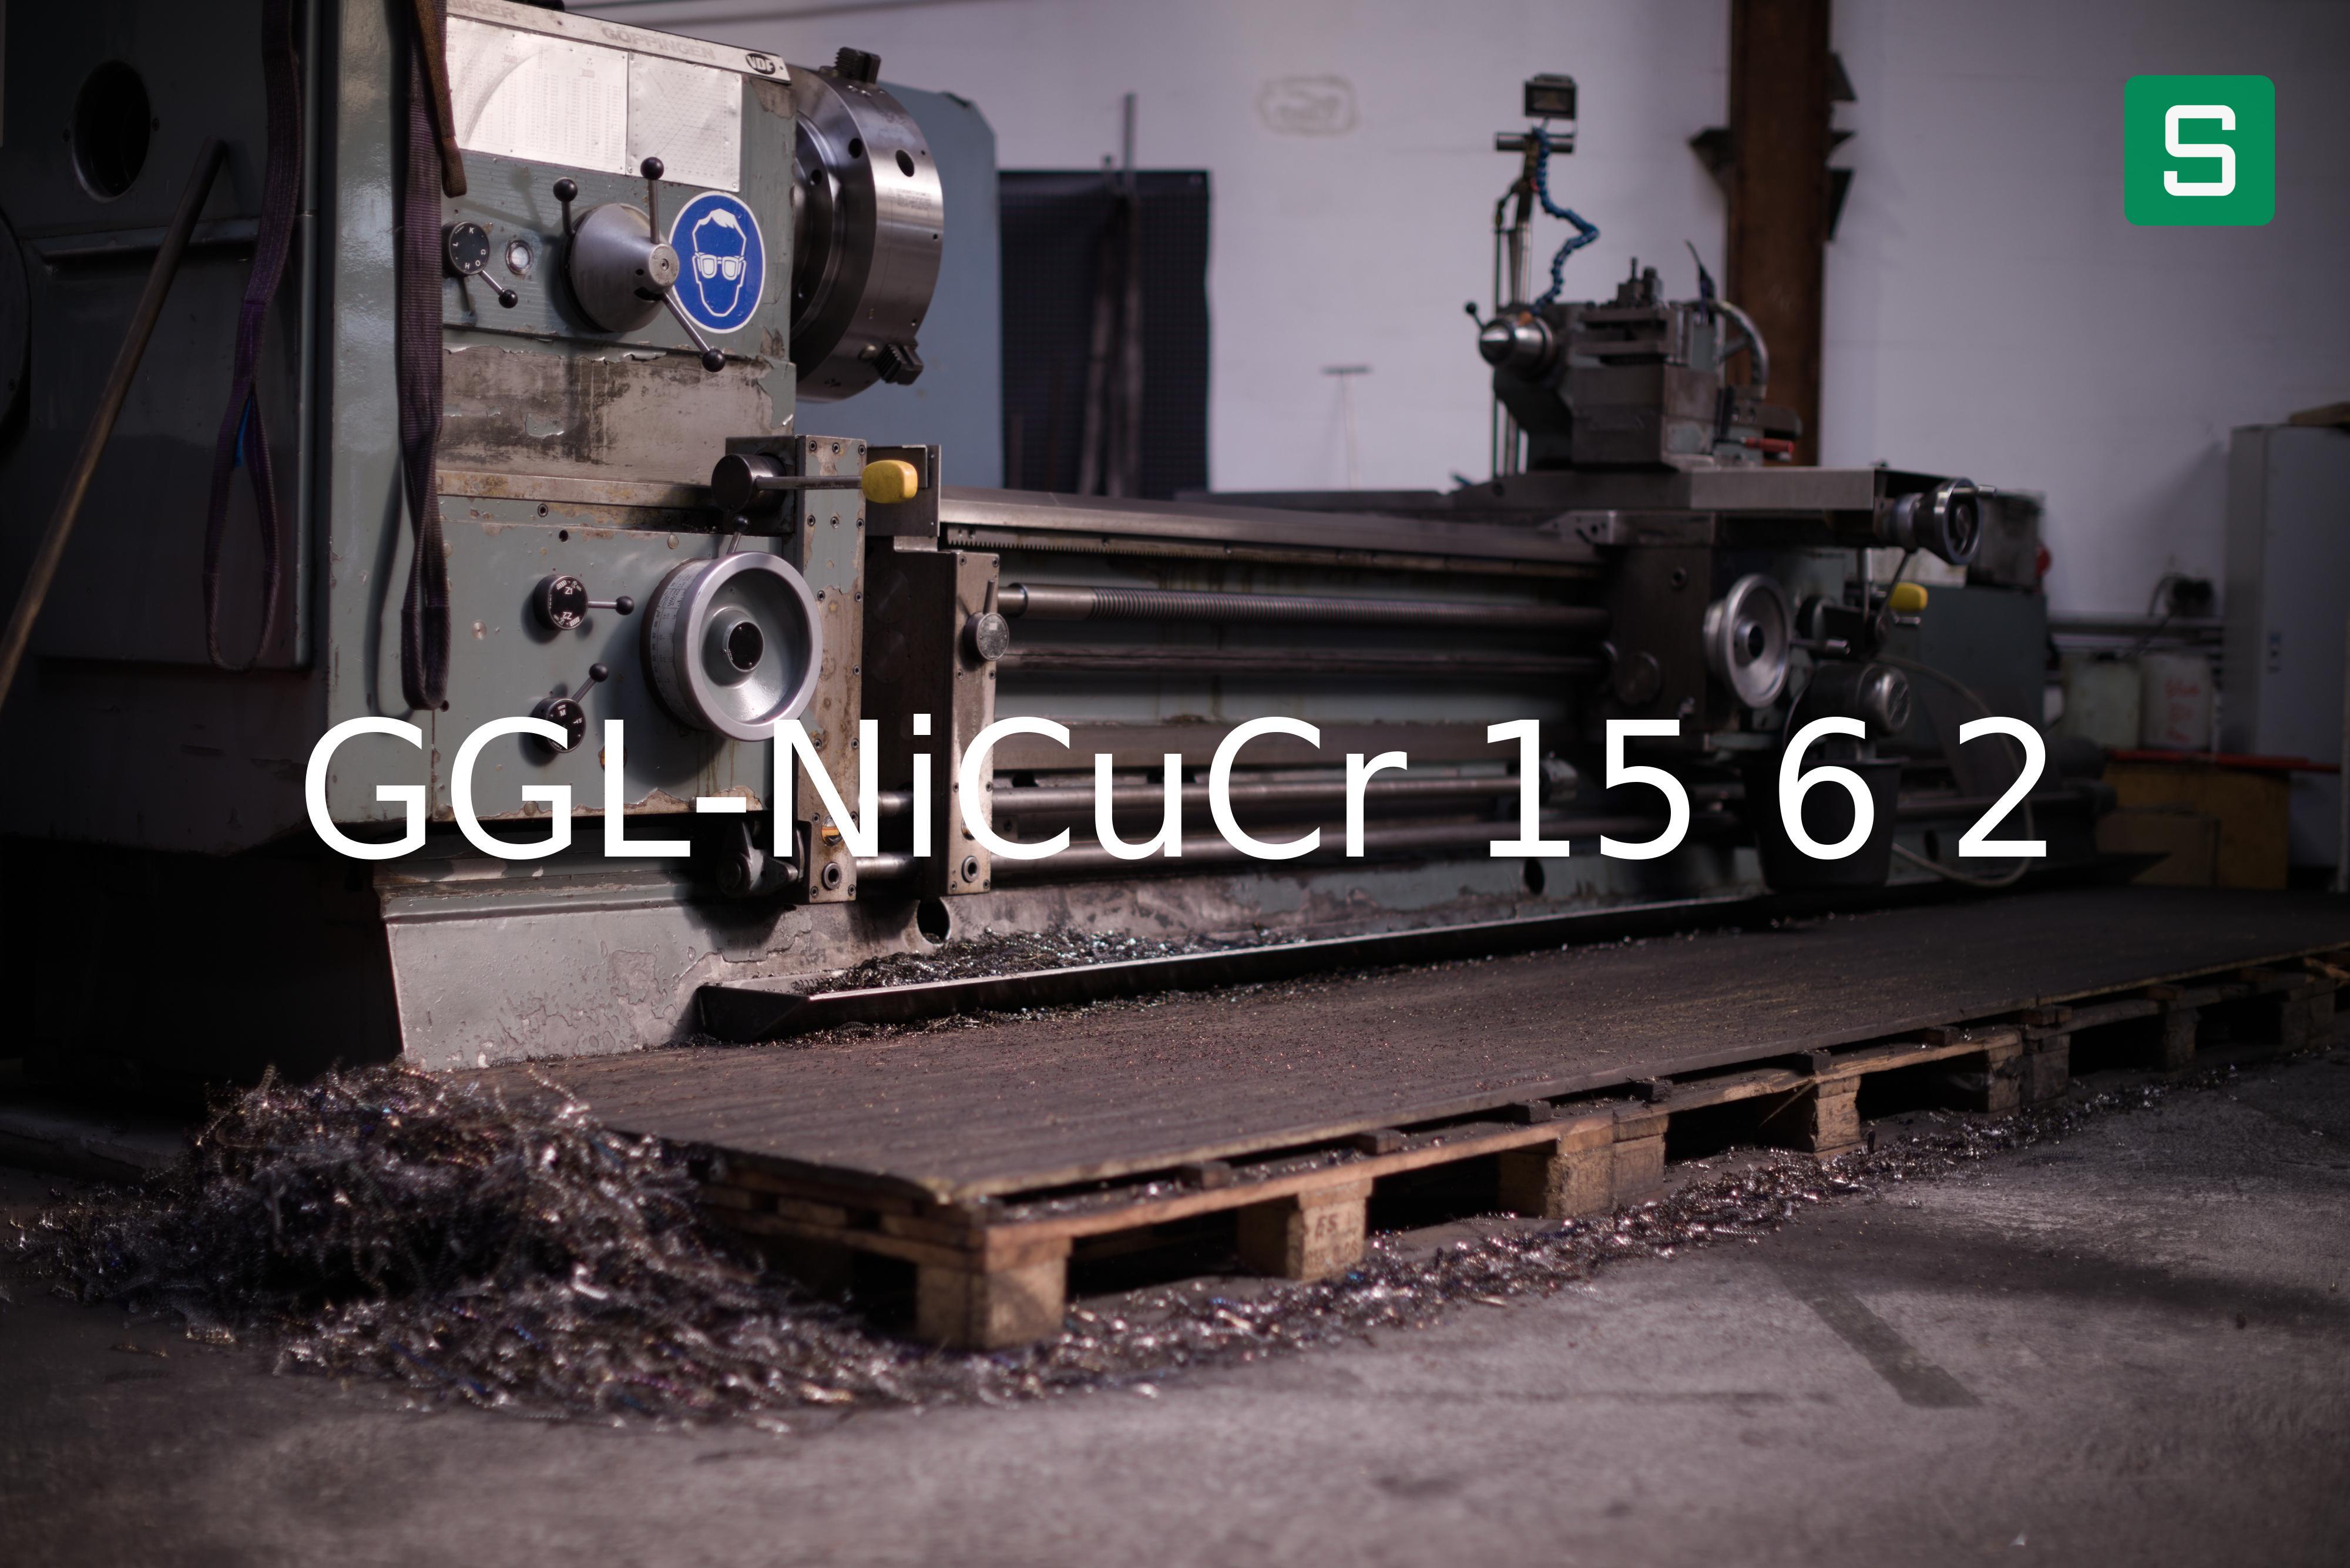 Steel Material: GGL-NiCuCr 15 6 2